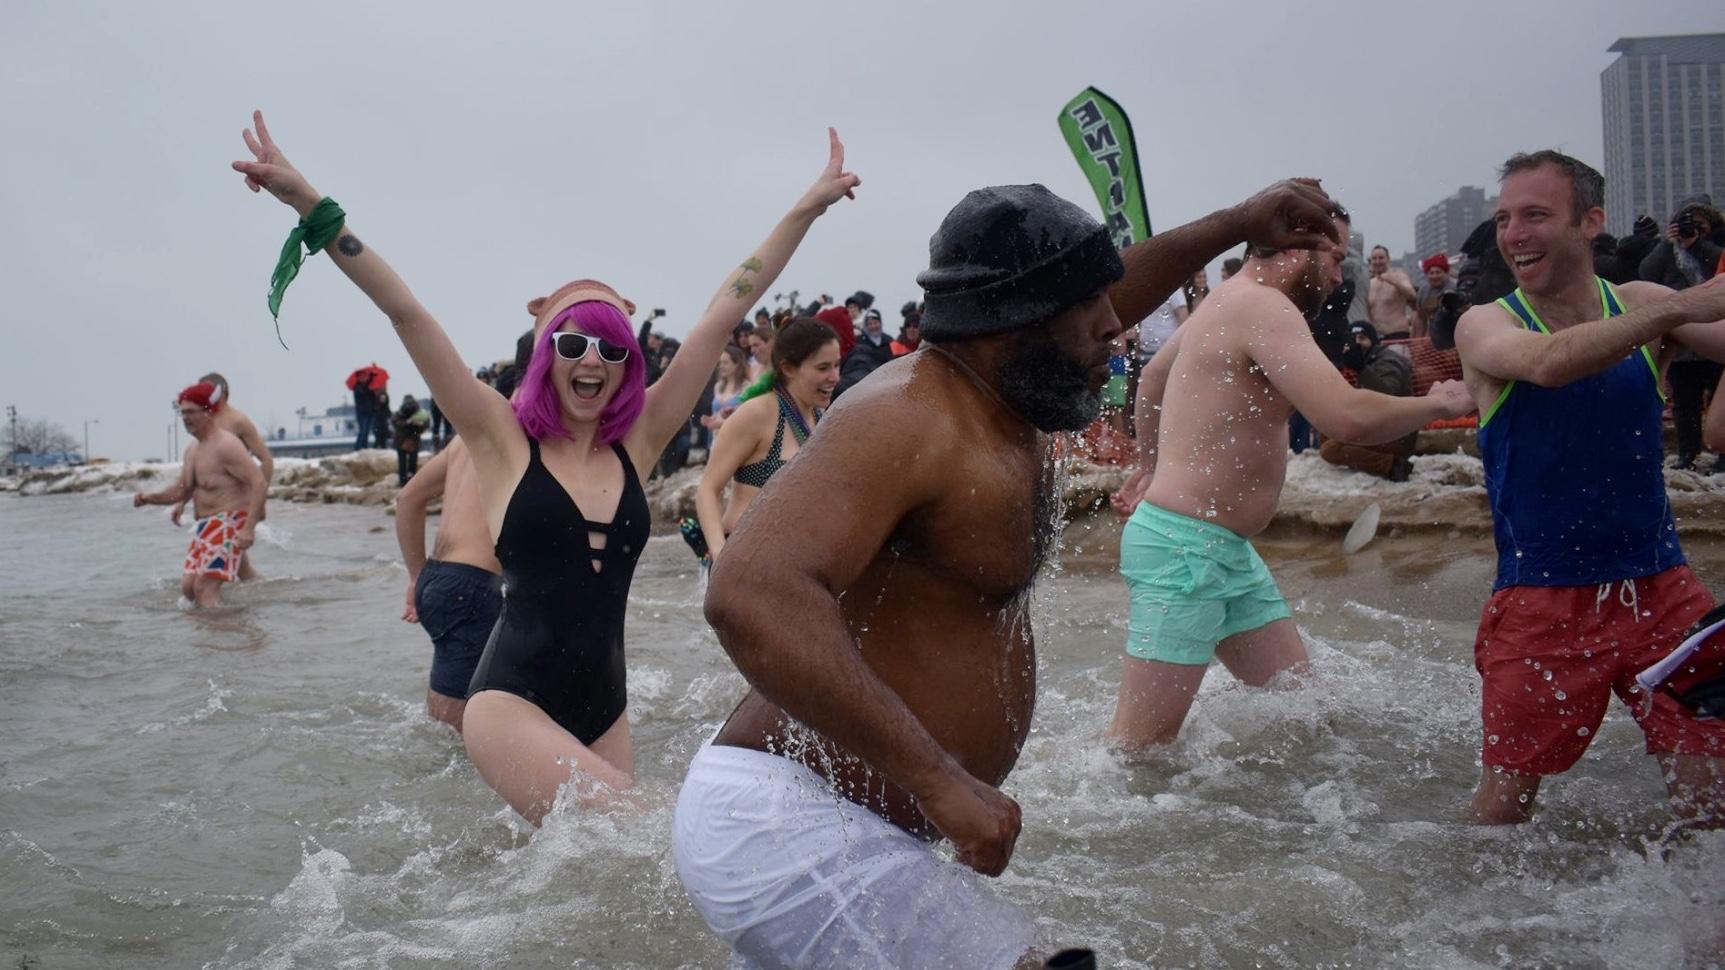 A scene from the 2020 Chicago Polar Bear Club’s plunge into Lake Michigan. This year’s “plunge where you are” will look different. (Courtesy of Chicago Polar Bear Club)